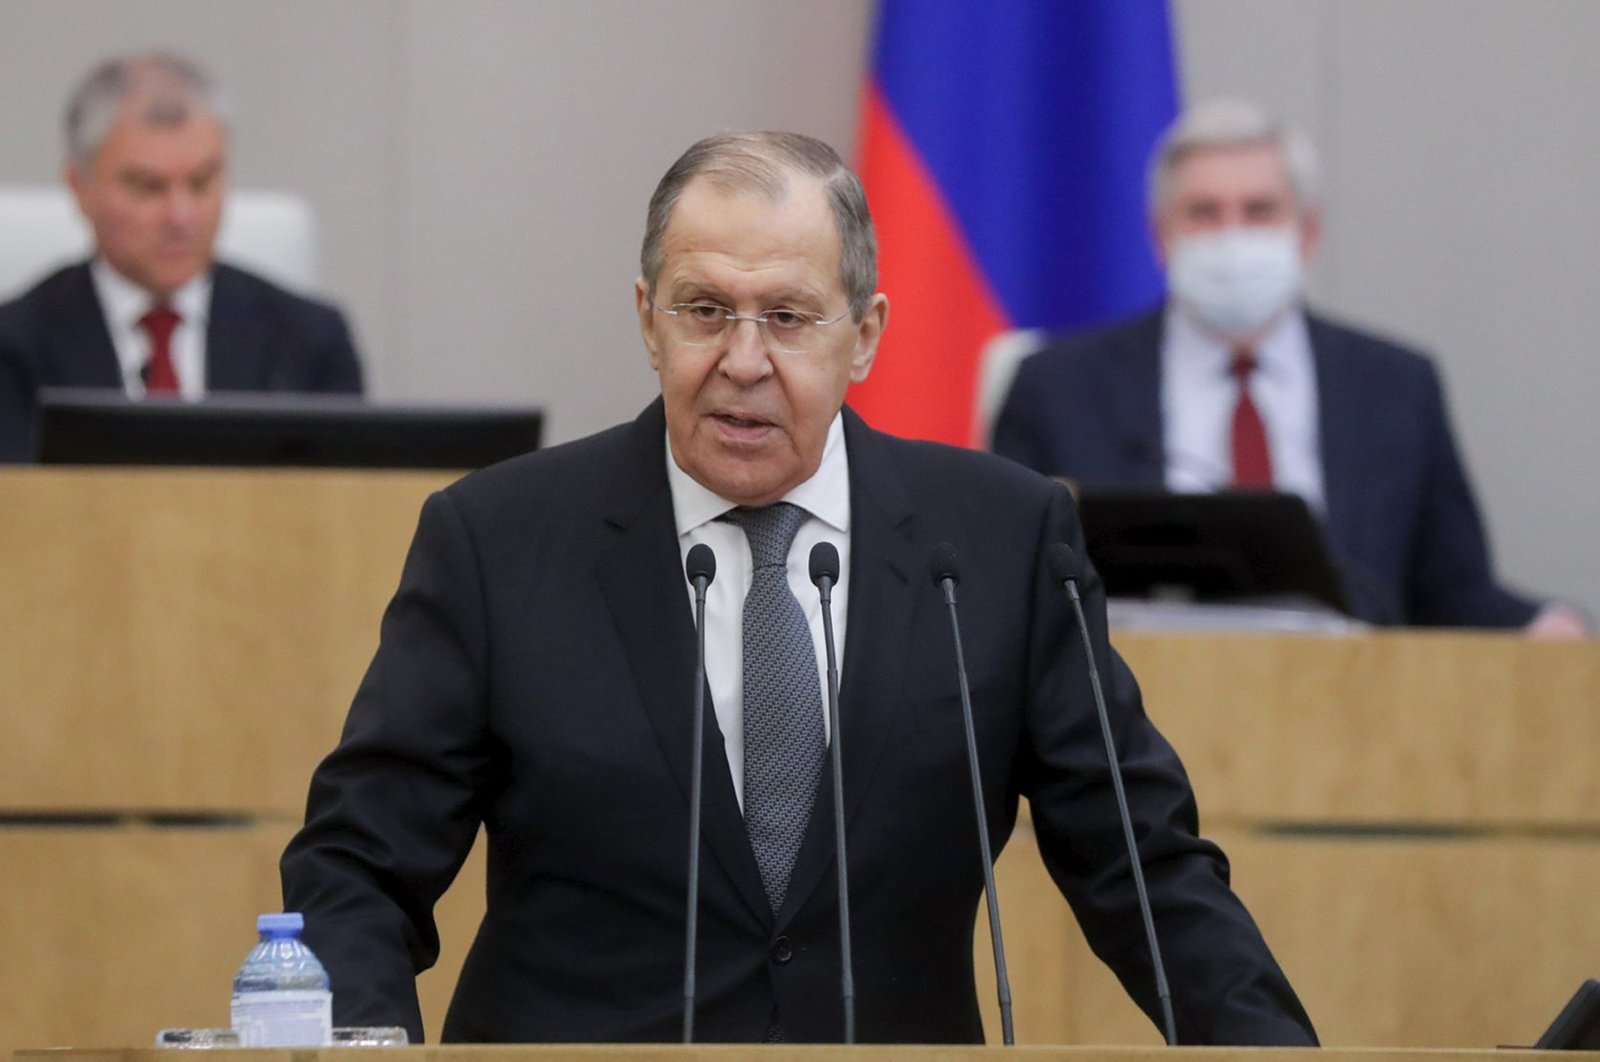 In this handout photo released by the State Duma, the Federal Assembly of the Russian Federation Press Service, Russian Foreign Minister Sergey Lavrov addresses the State Duma, the lower house of the Russian Parliament, Moscow, Russia, Jan. 26, 2022. (AP Photo)